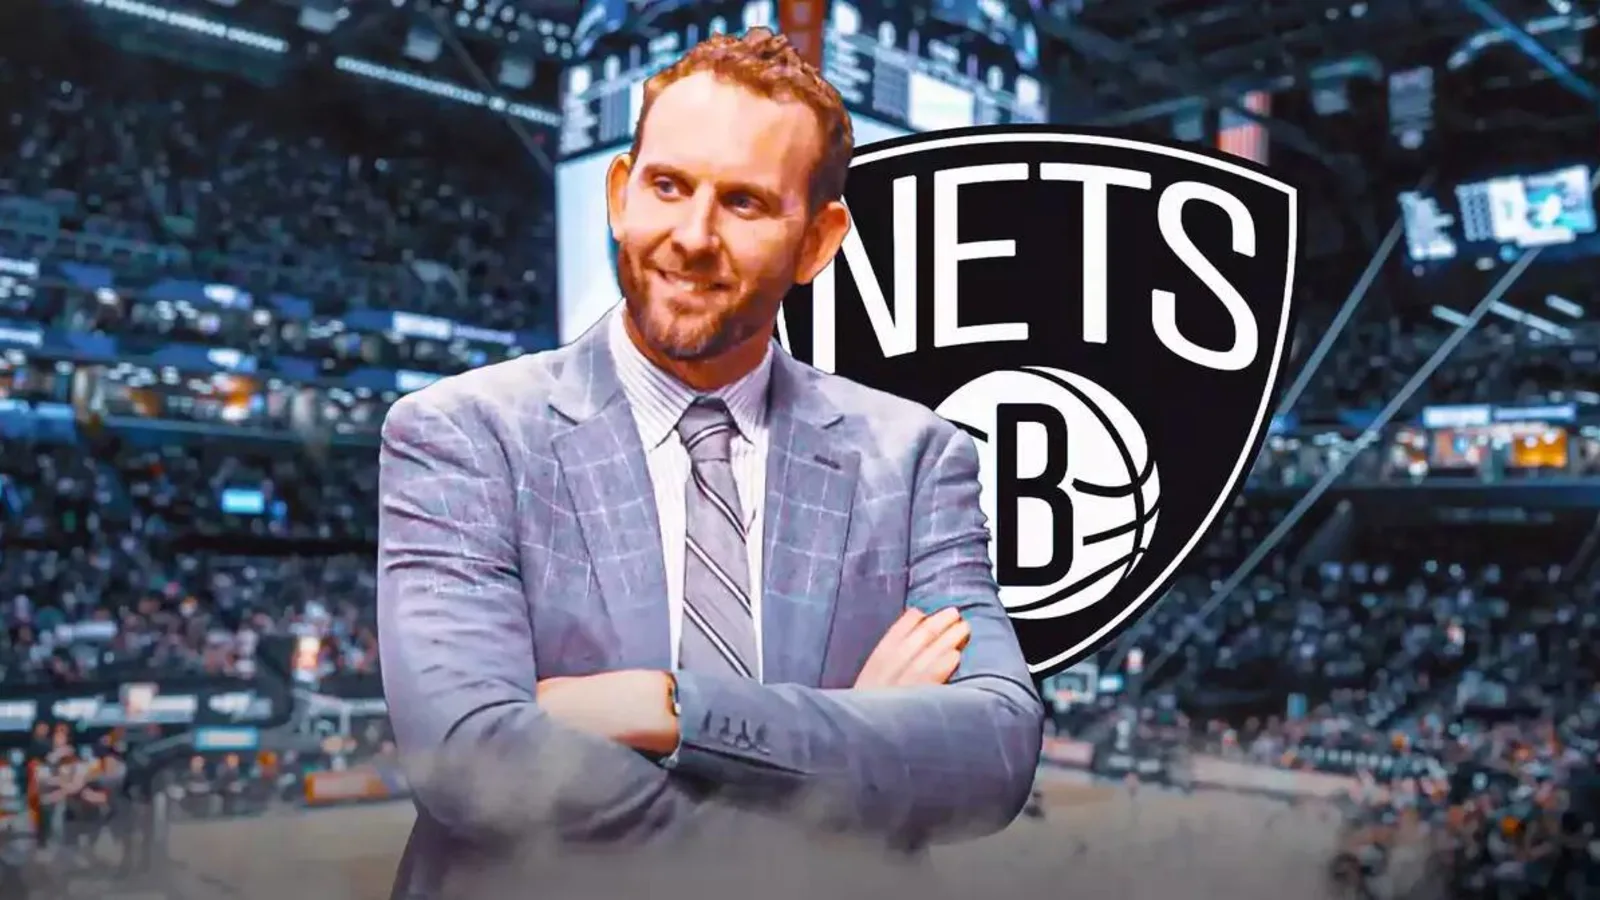  Sean Marks’ real standing with Nets bosses amid exit buzz